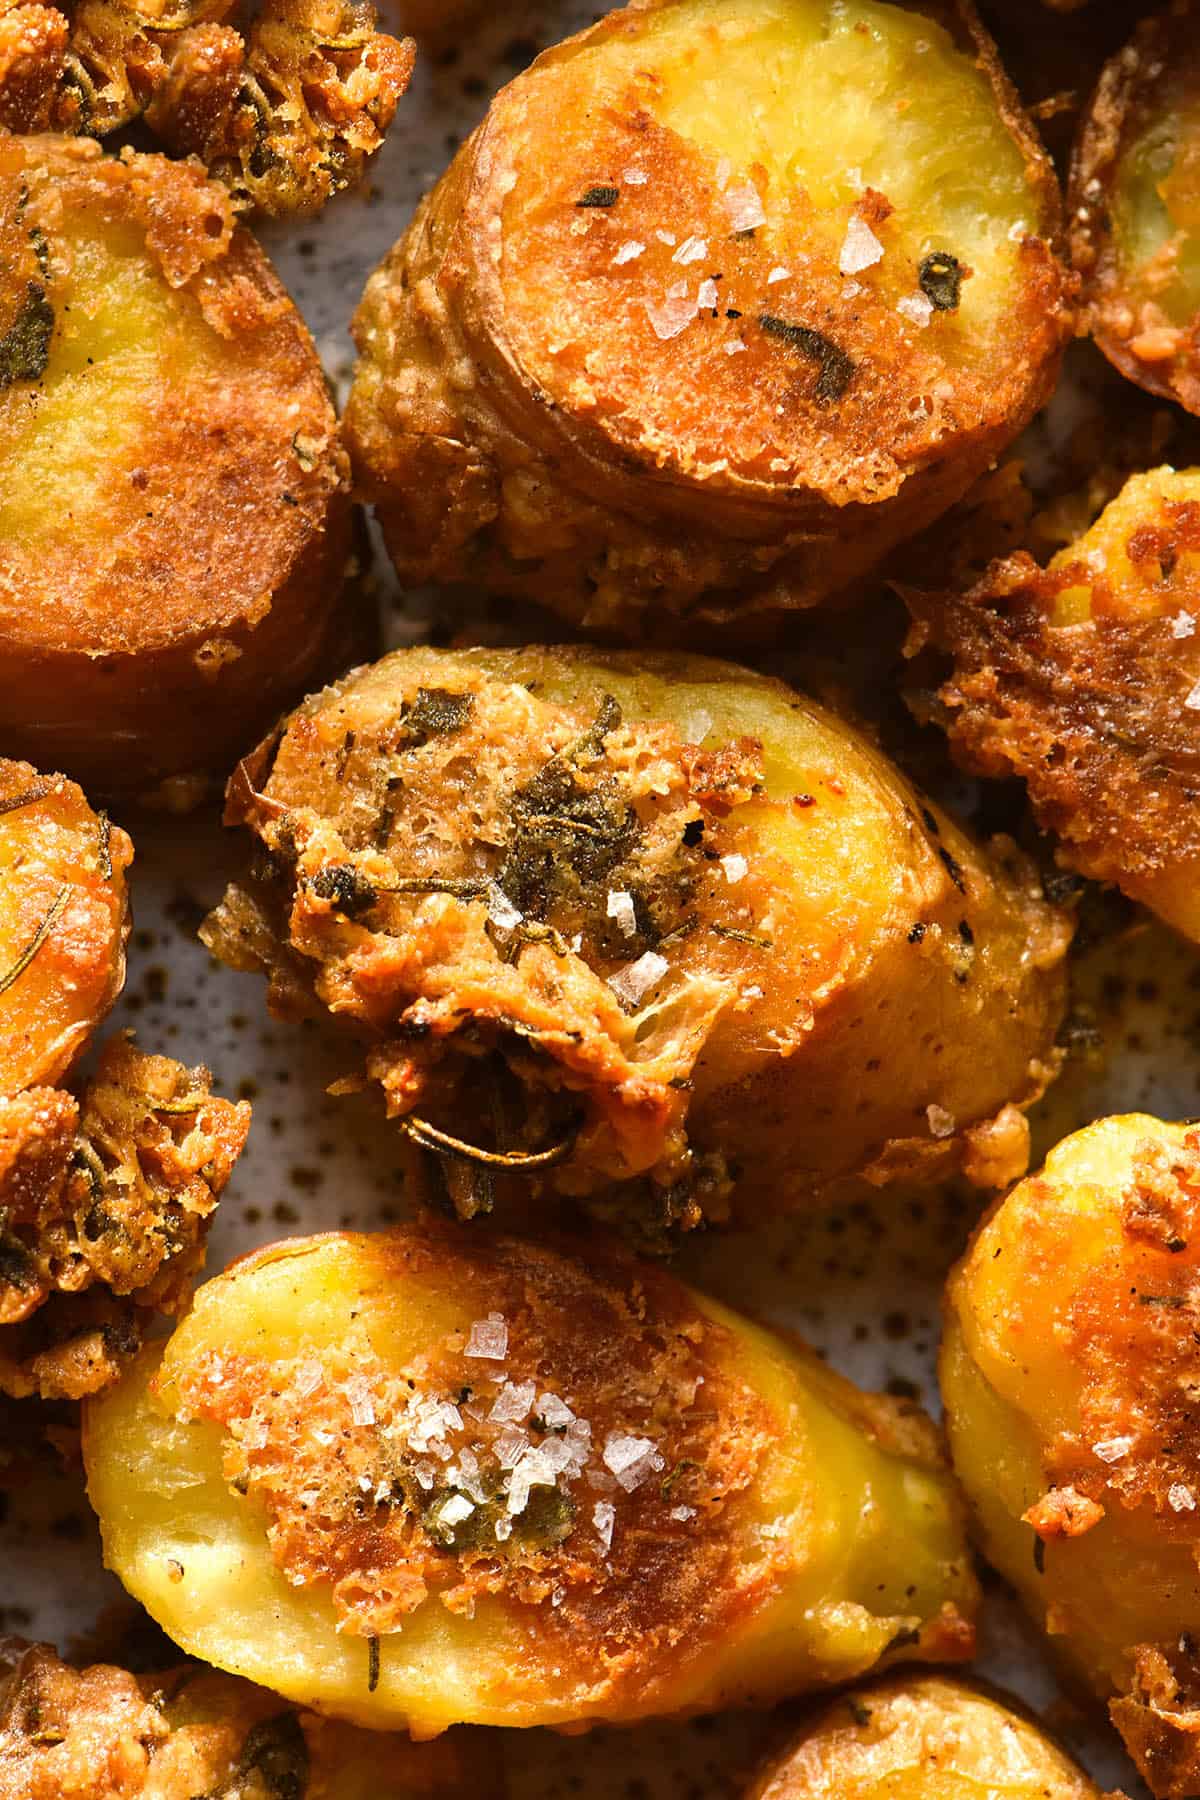 An aerial close up image of roasted kipfler potatoes with a herb and parmesan crust. The potatoes are crunchy, golden brown and topped with a sprinkle of sea salt flakes